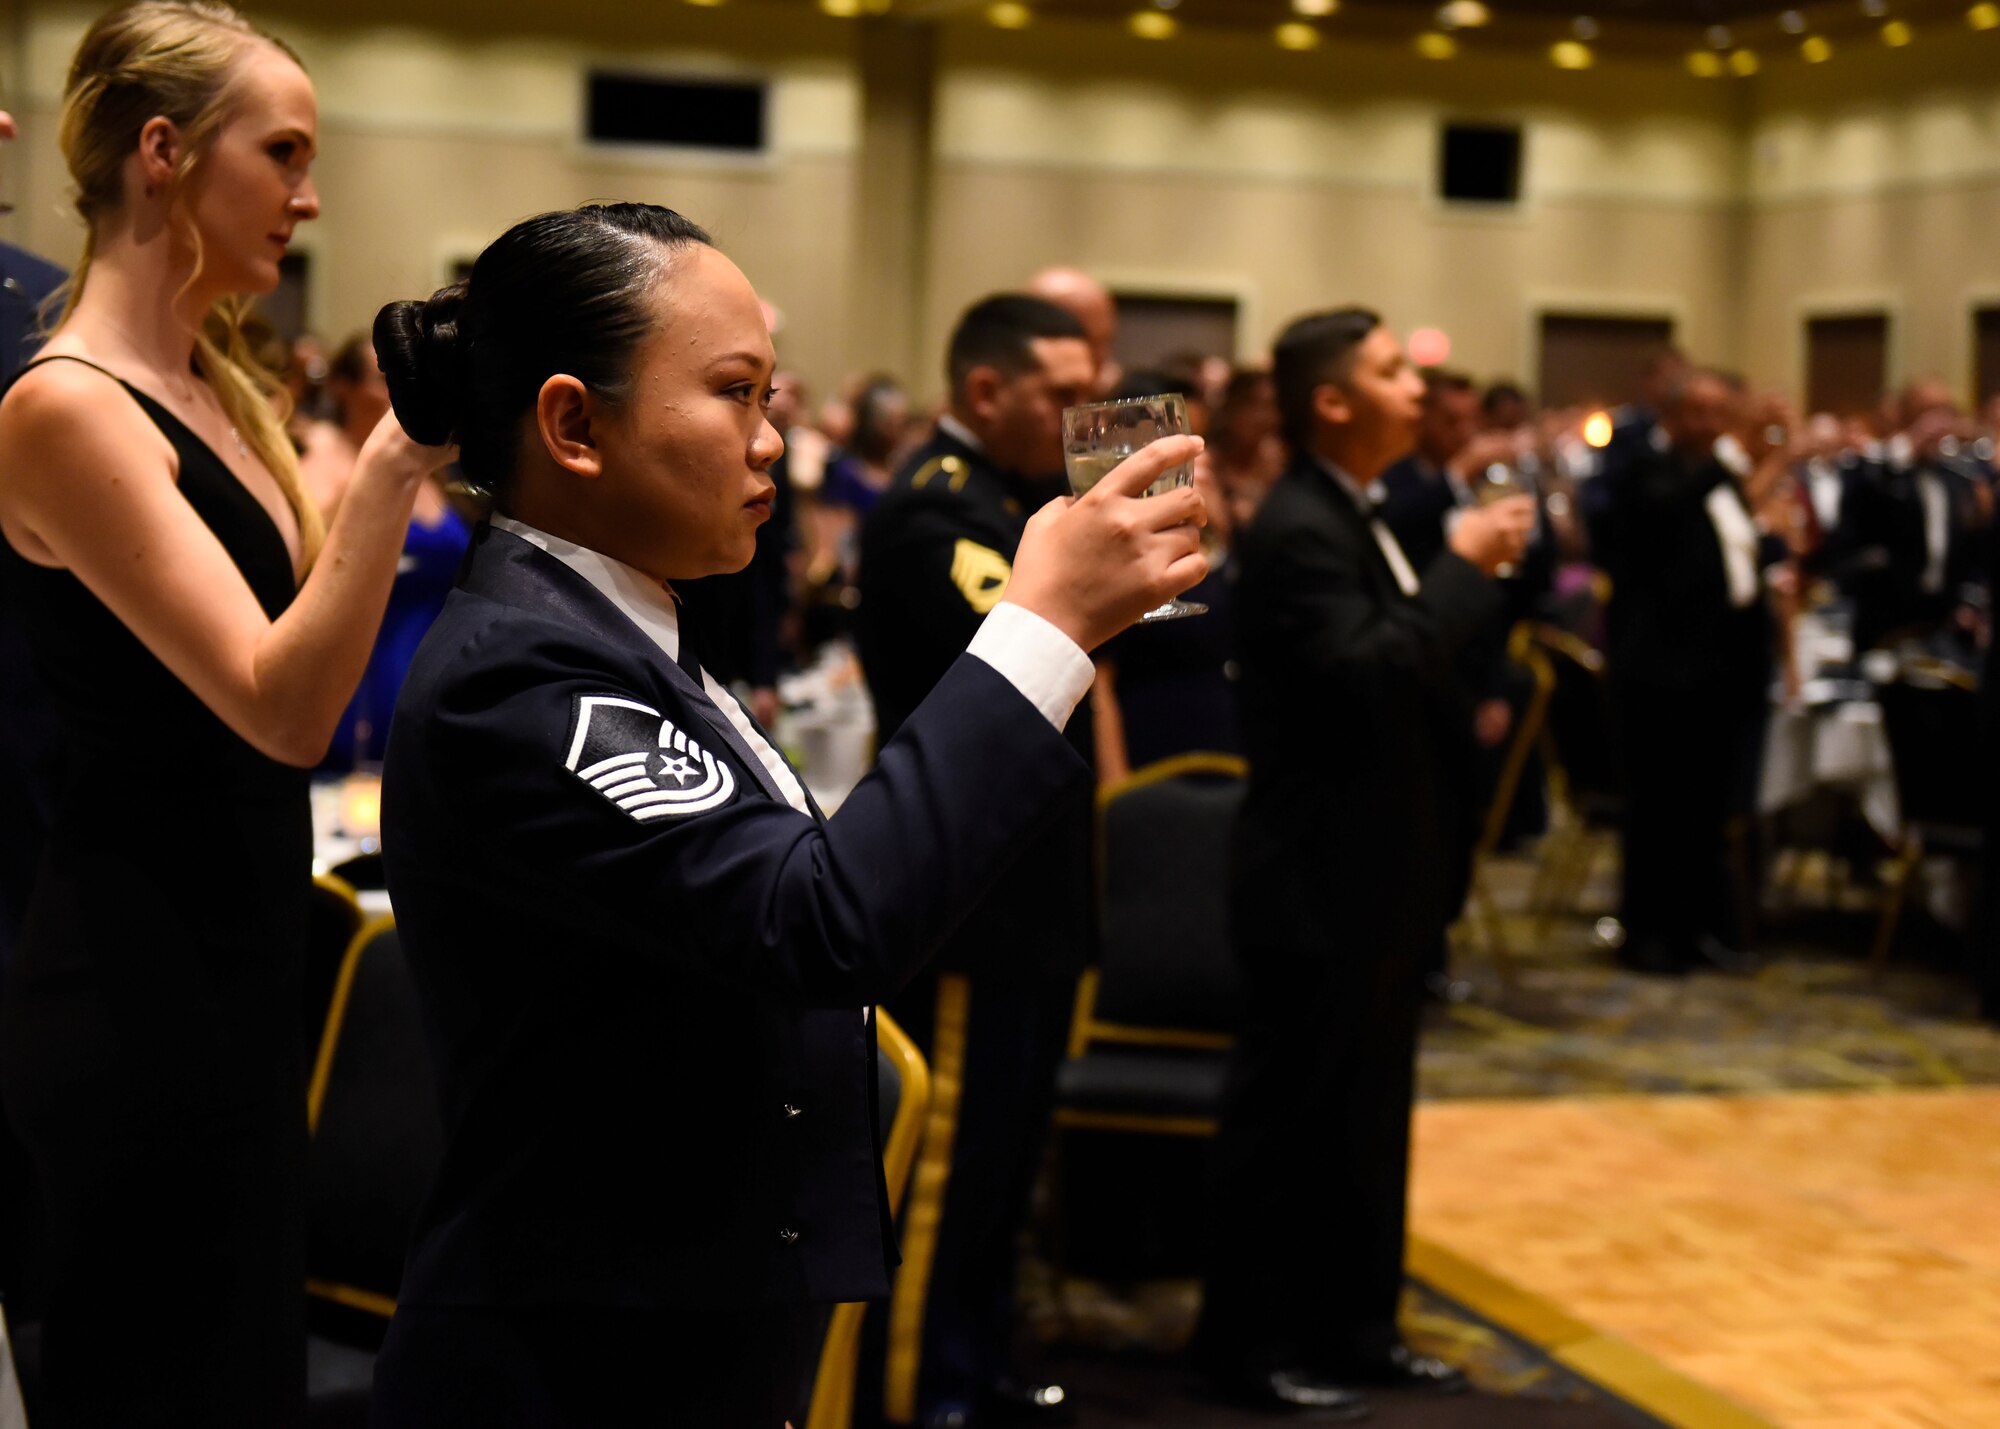 Master Sgt. Cyd Arandia, 92nd Comptroller Squadron flight chief, raises her glass as part of a toast during Fairchild's Air Force Ball at Northern Quest Resort and Casino in Airway Heights, Washington, Sept. 15, 2018. Toasts were made to honor the flag, the president, and all commanders and chiefs of each service branch. (U.S. Air Force photo/Airman 1st Class Lawrence Sena)